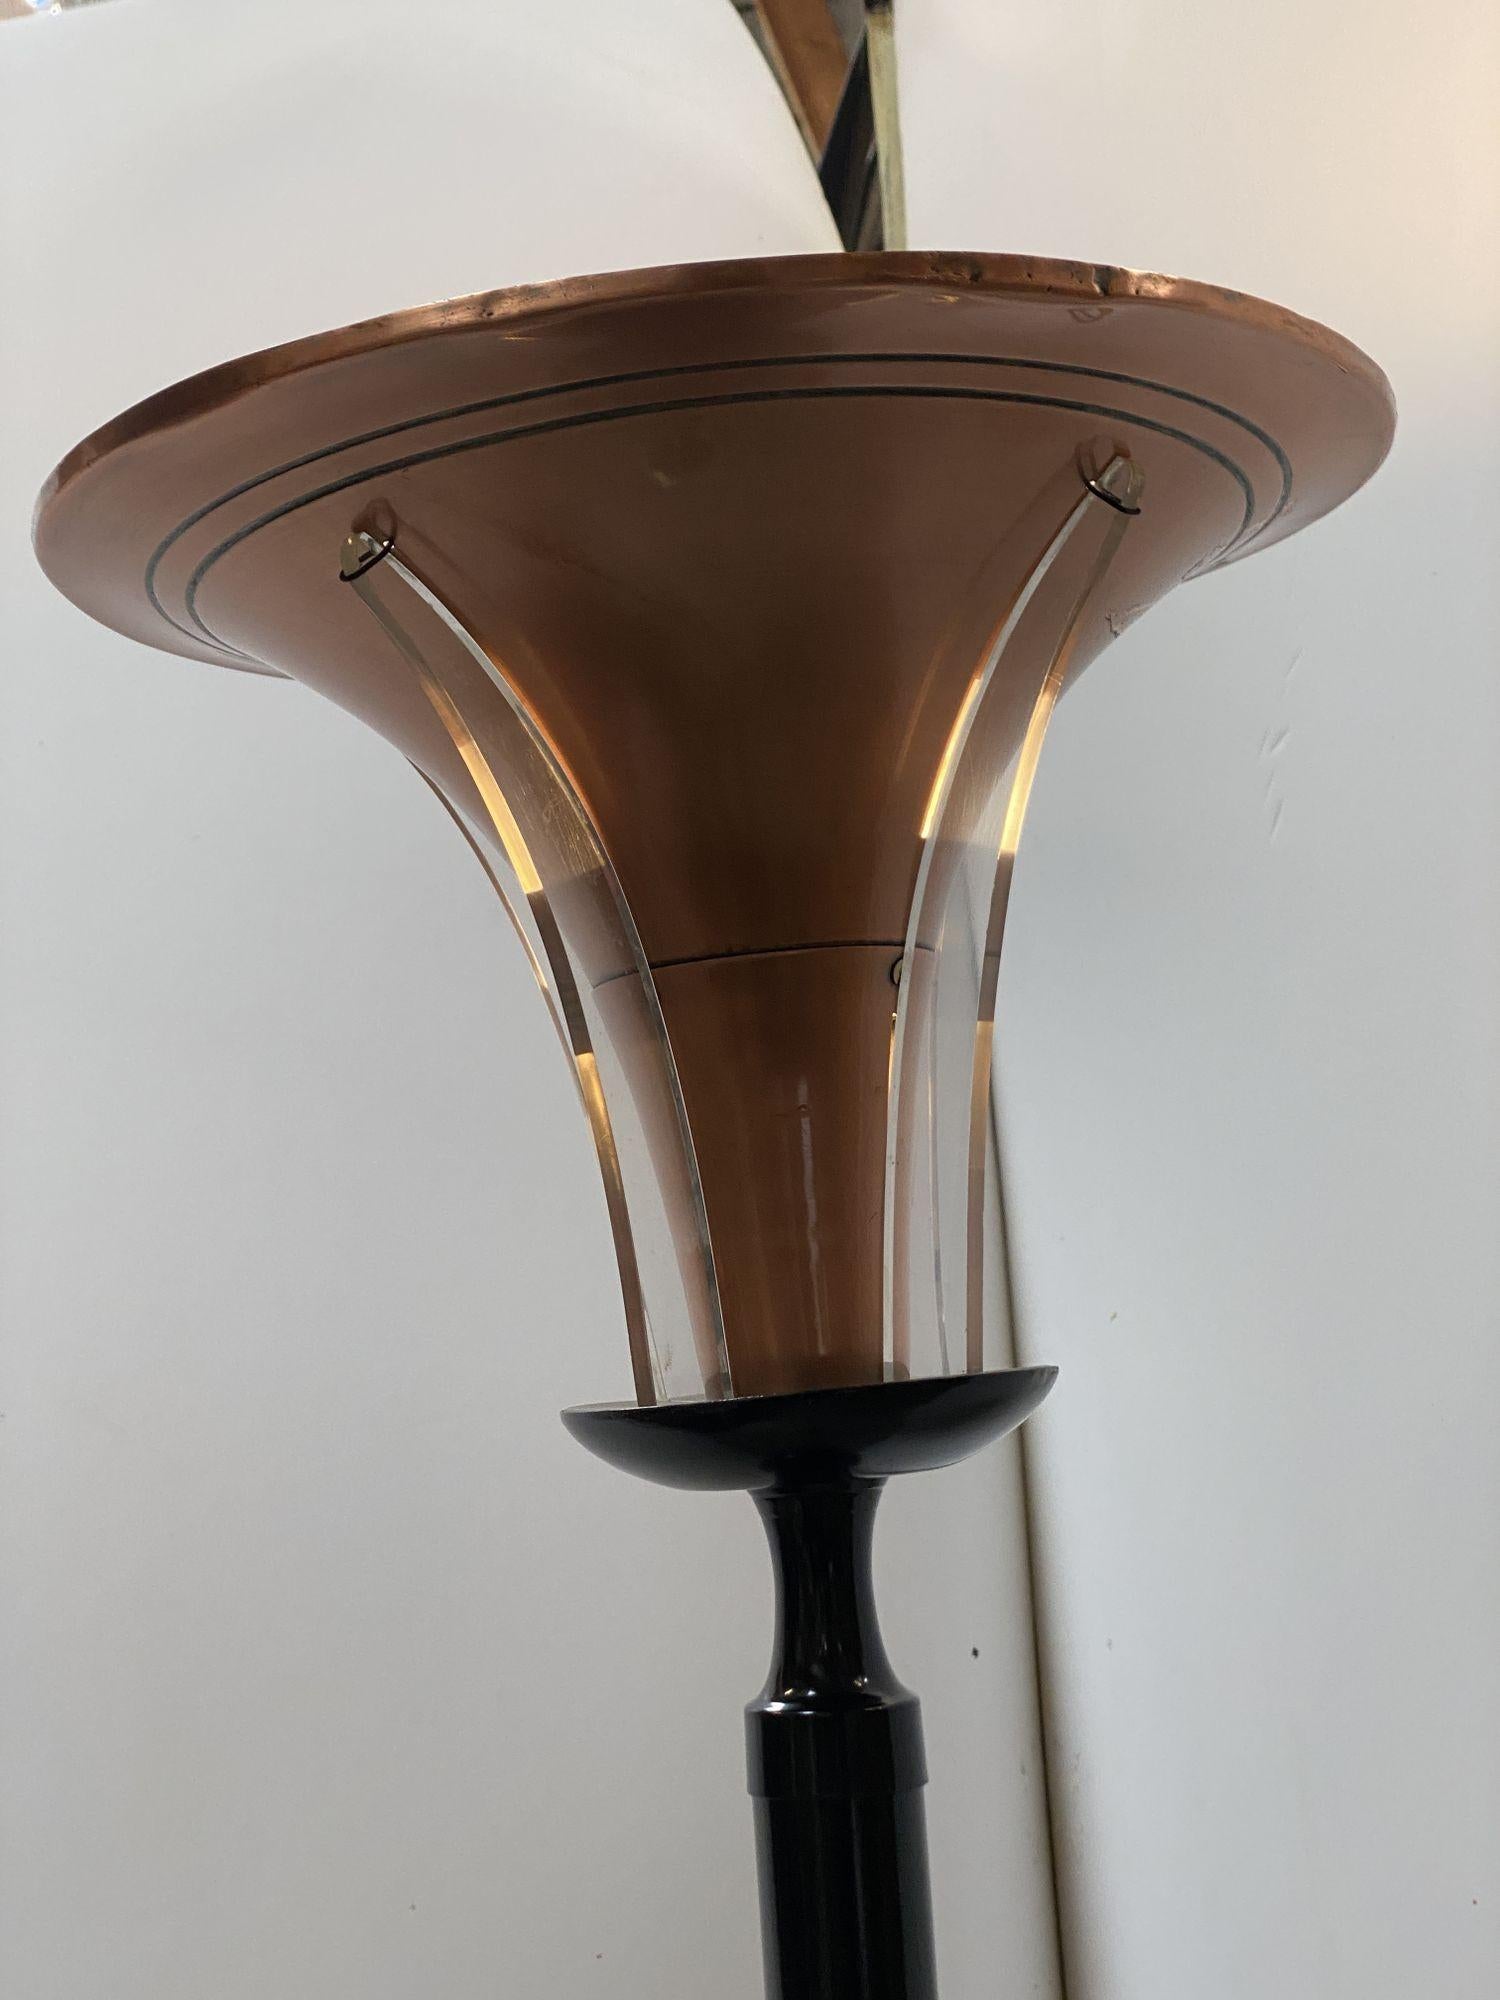 High Style Brass and Copper Art Deco Torchiere Floor Lamp w/ Acrylic Accents In Excellent Condition For Sale In Van Nuys, CA